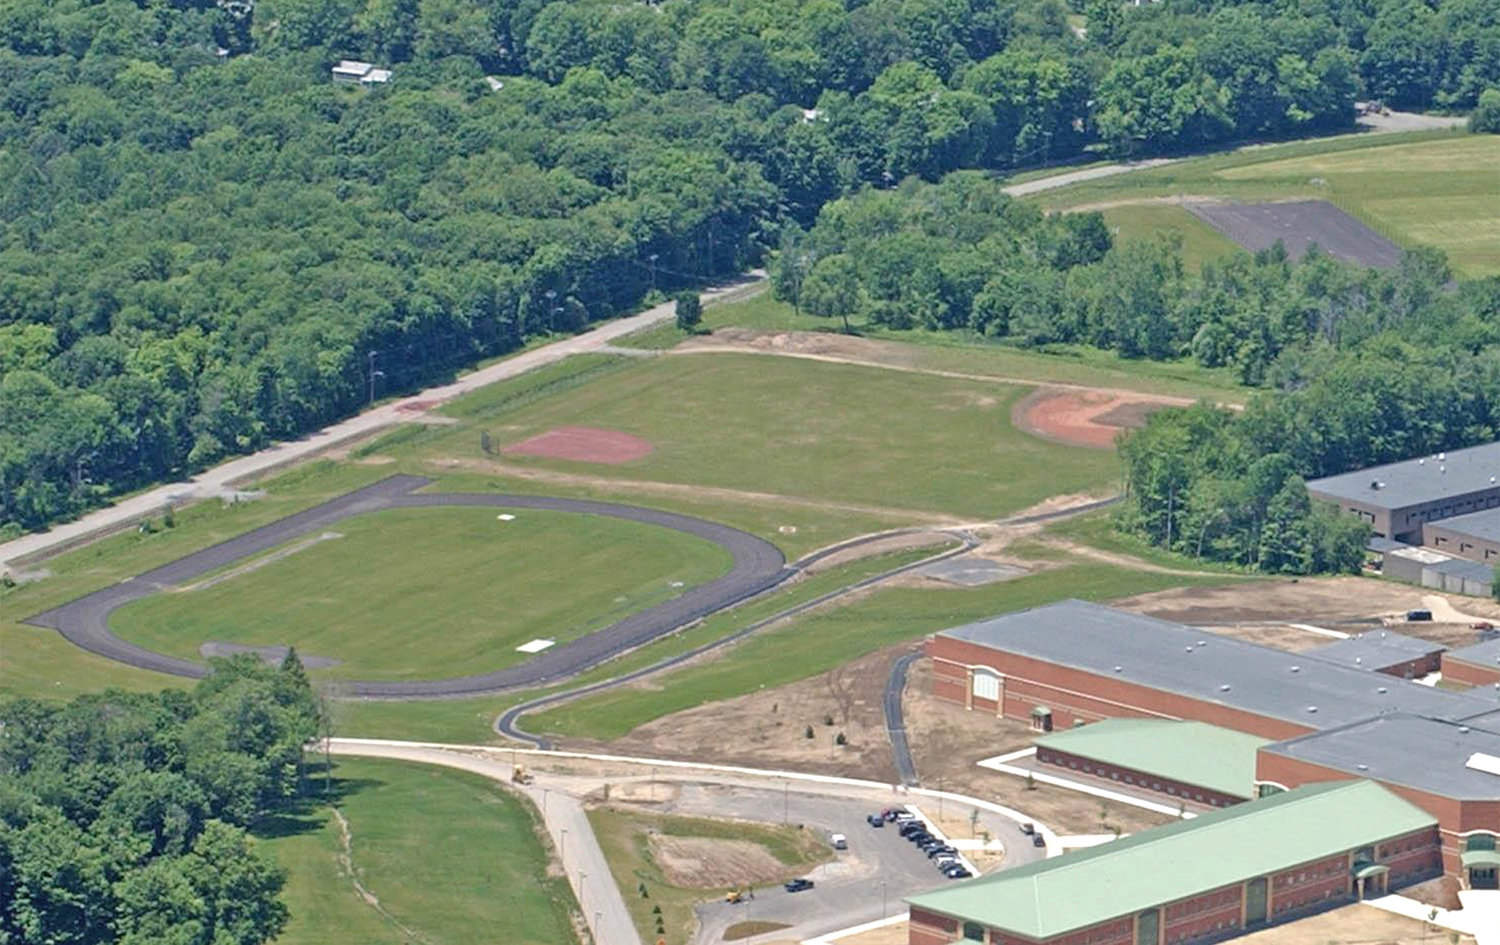 LOOK FROM ABOVE — This aerial photo from 2002 — just before the new school was to open — shows the playing areas used for physical education classes at Rome Free Academy. A $21.6 million capital project would include work to construct a baseball and softball field there for interscholastic competition.